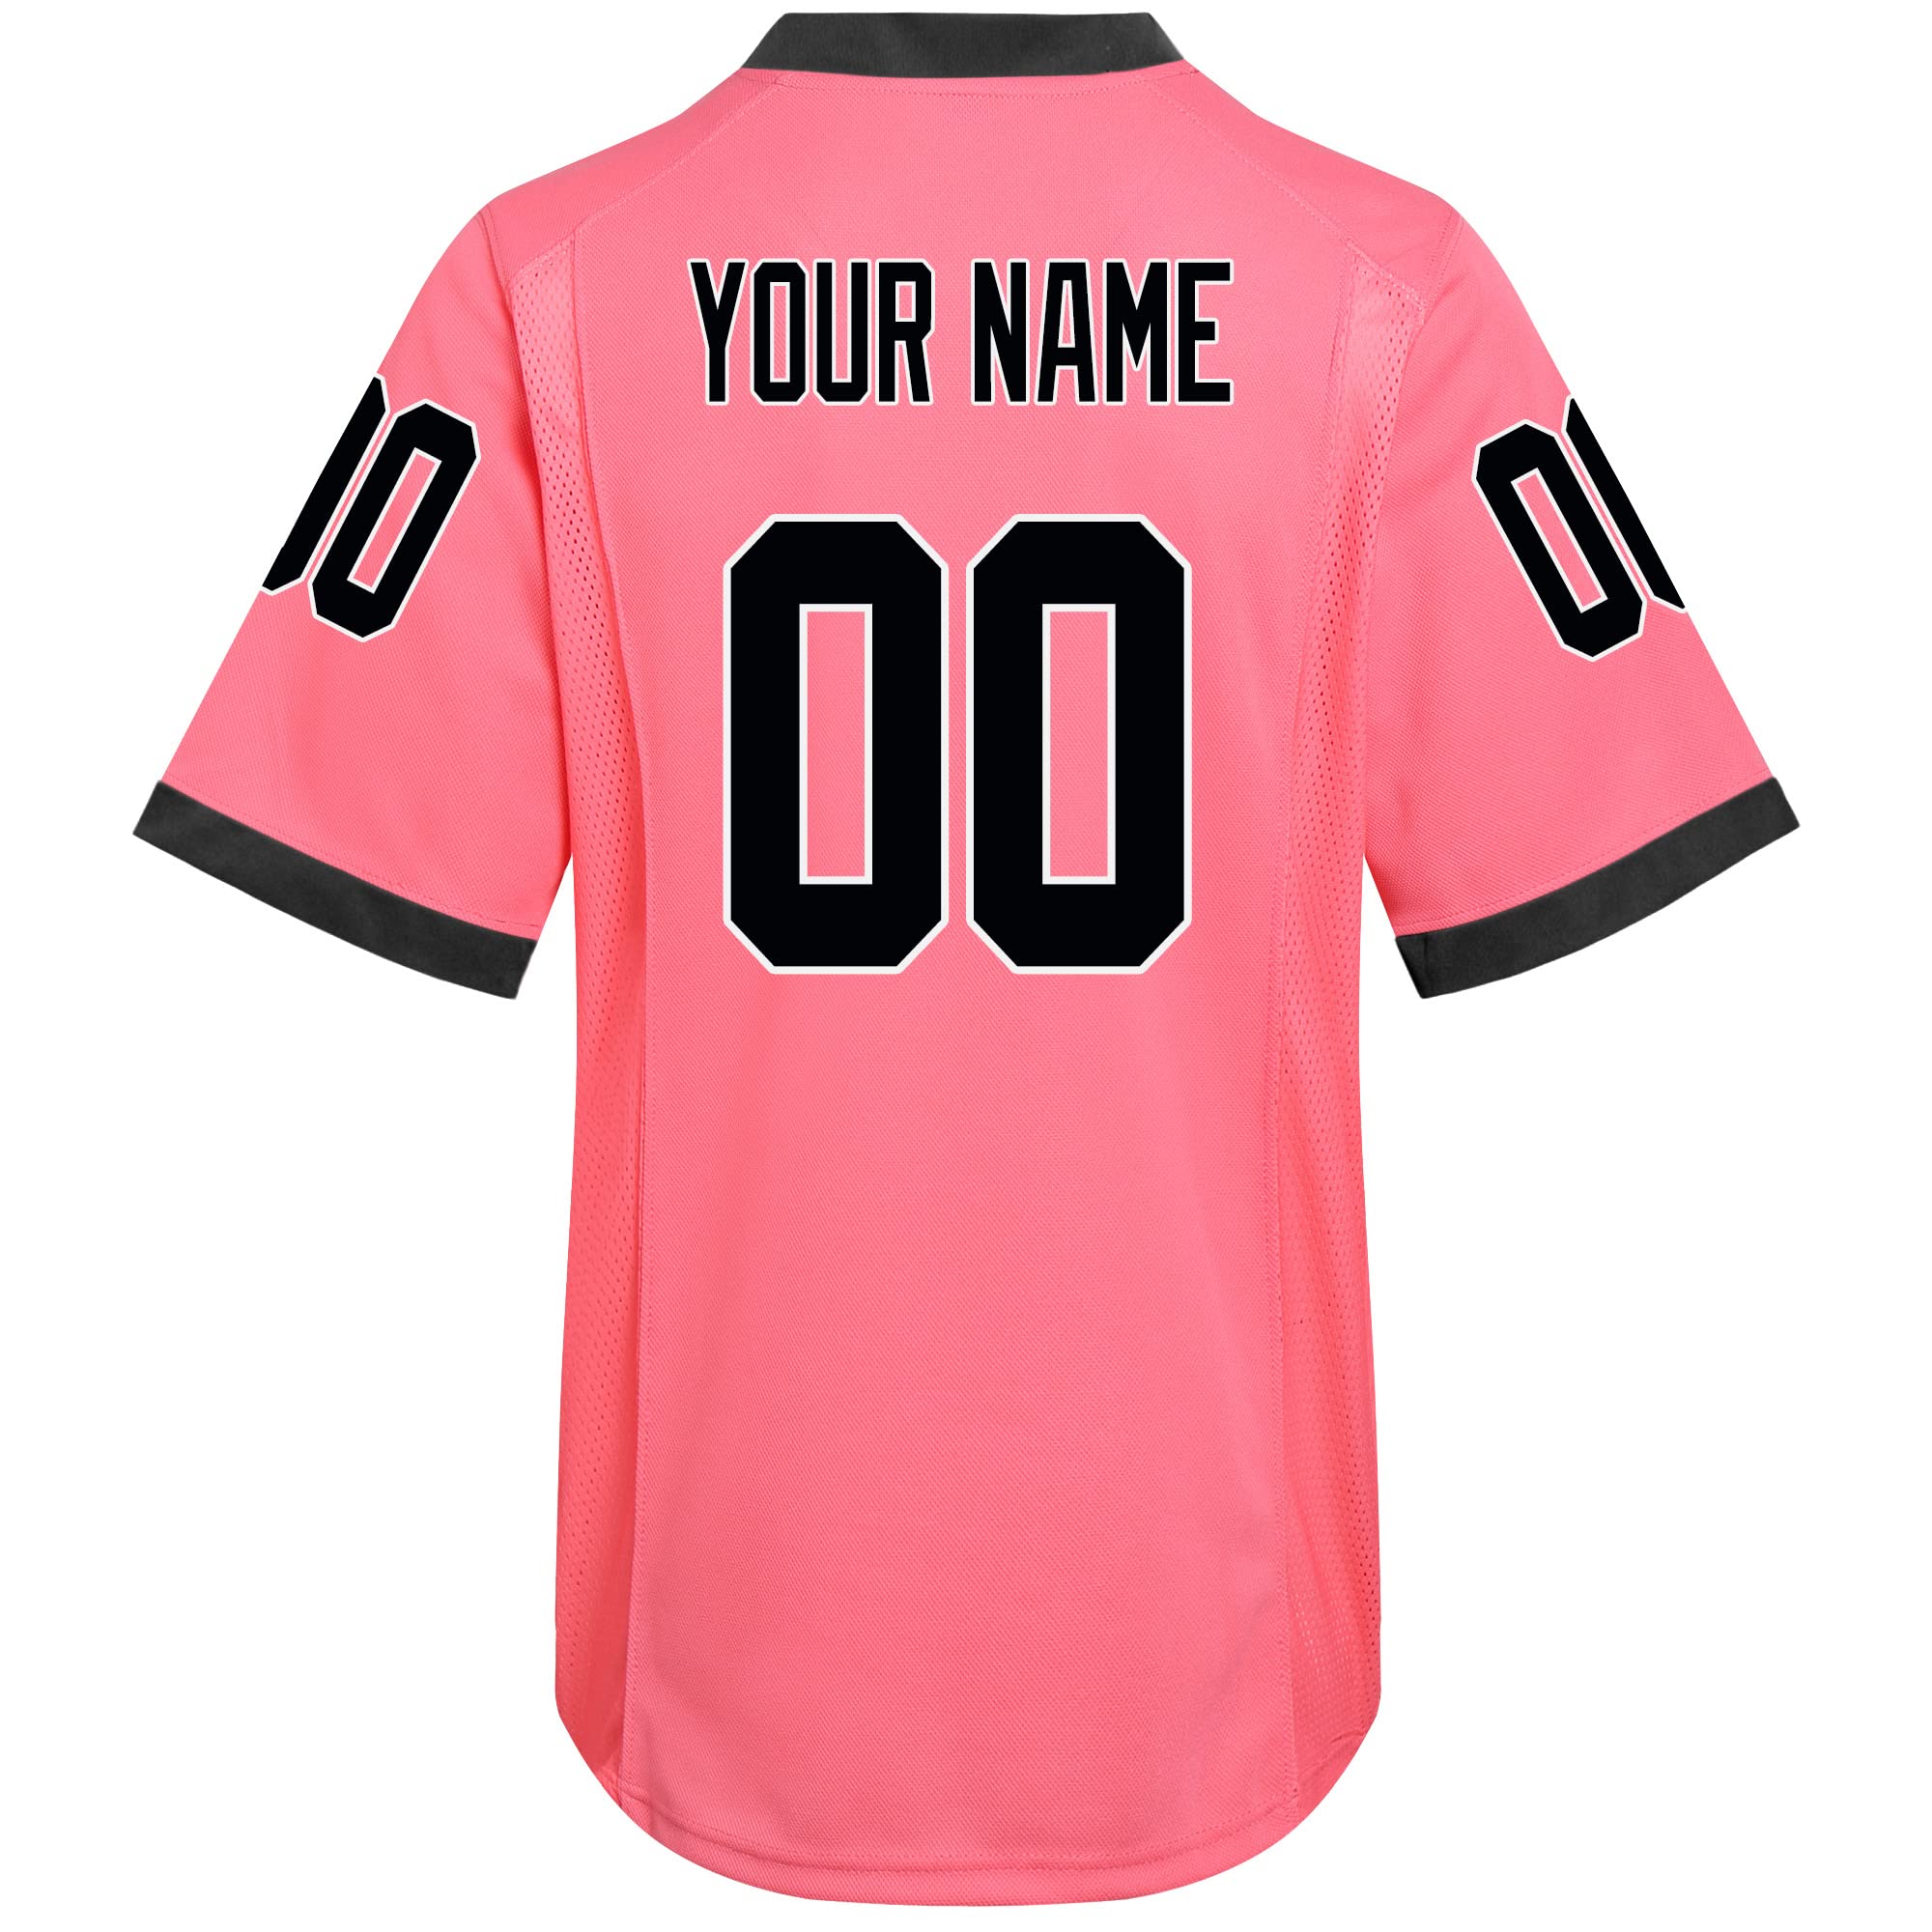 DEHANER Custom Football Jersey for Men Women Kids Blank Practice American Jerseys Stitched Printed Names Numbers S-8XL